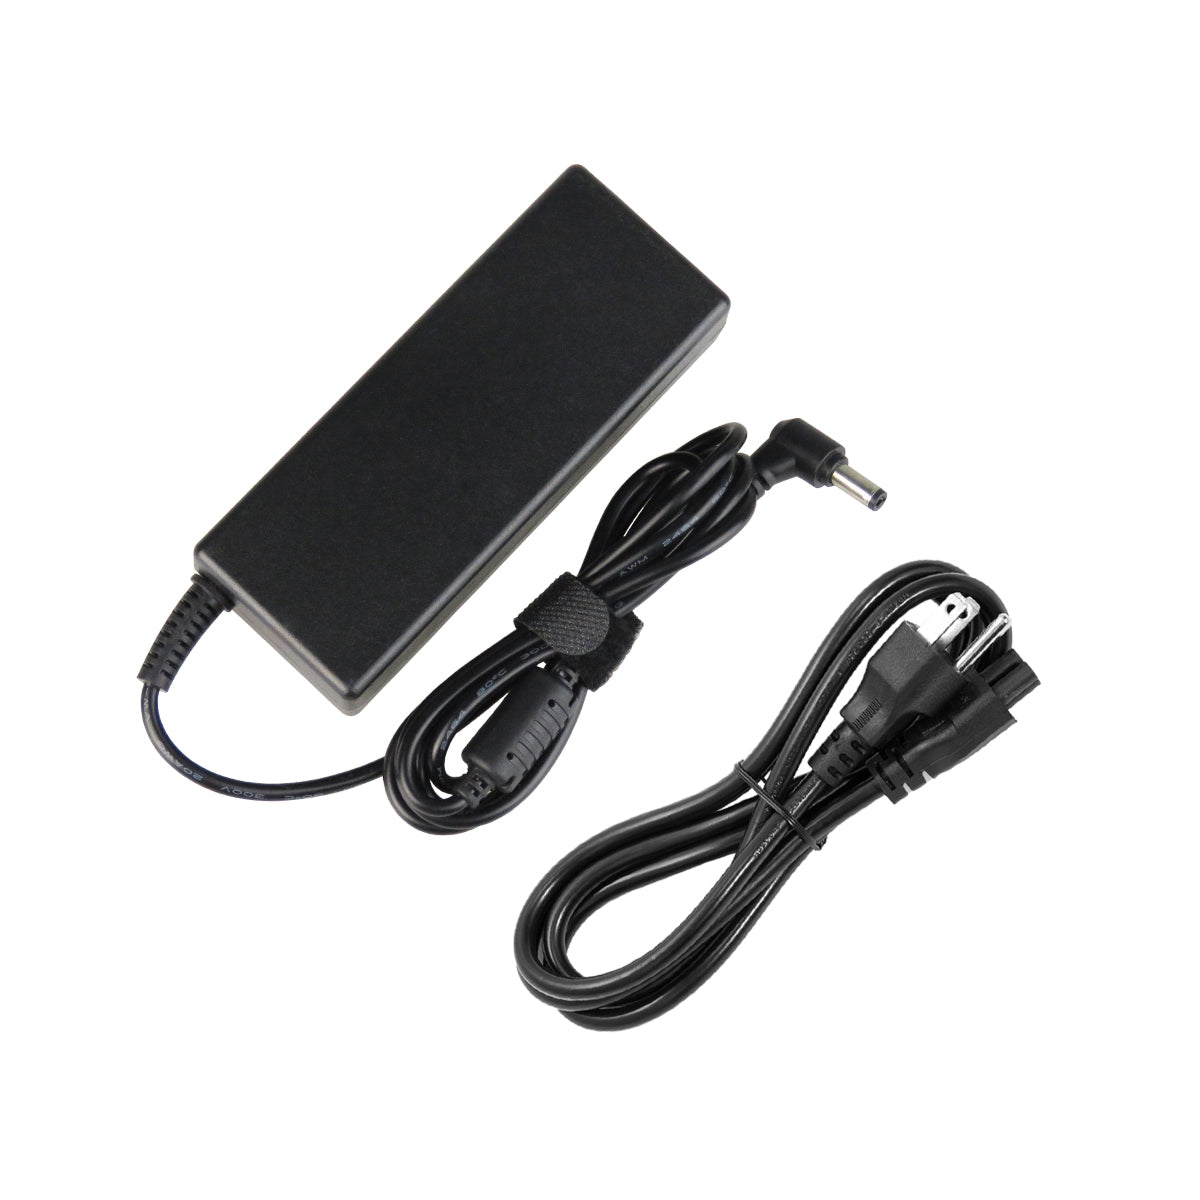 AC Adapter Charger for Gateway ML6230 Notebook.